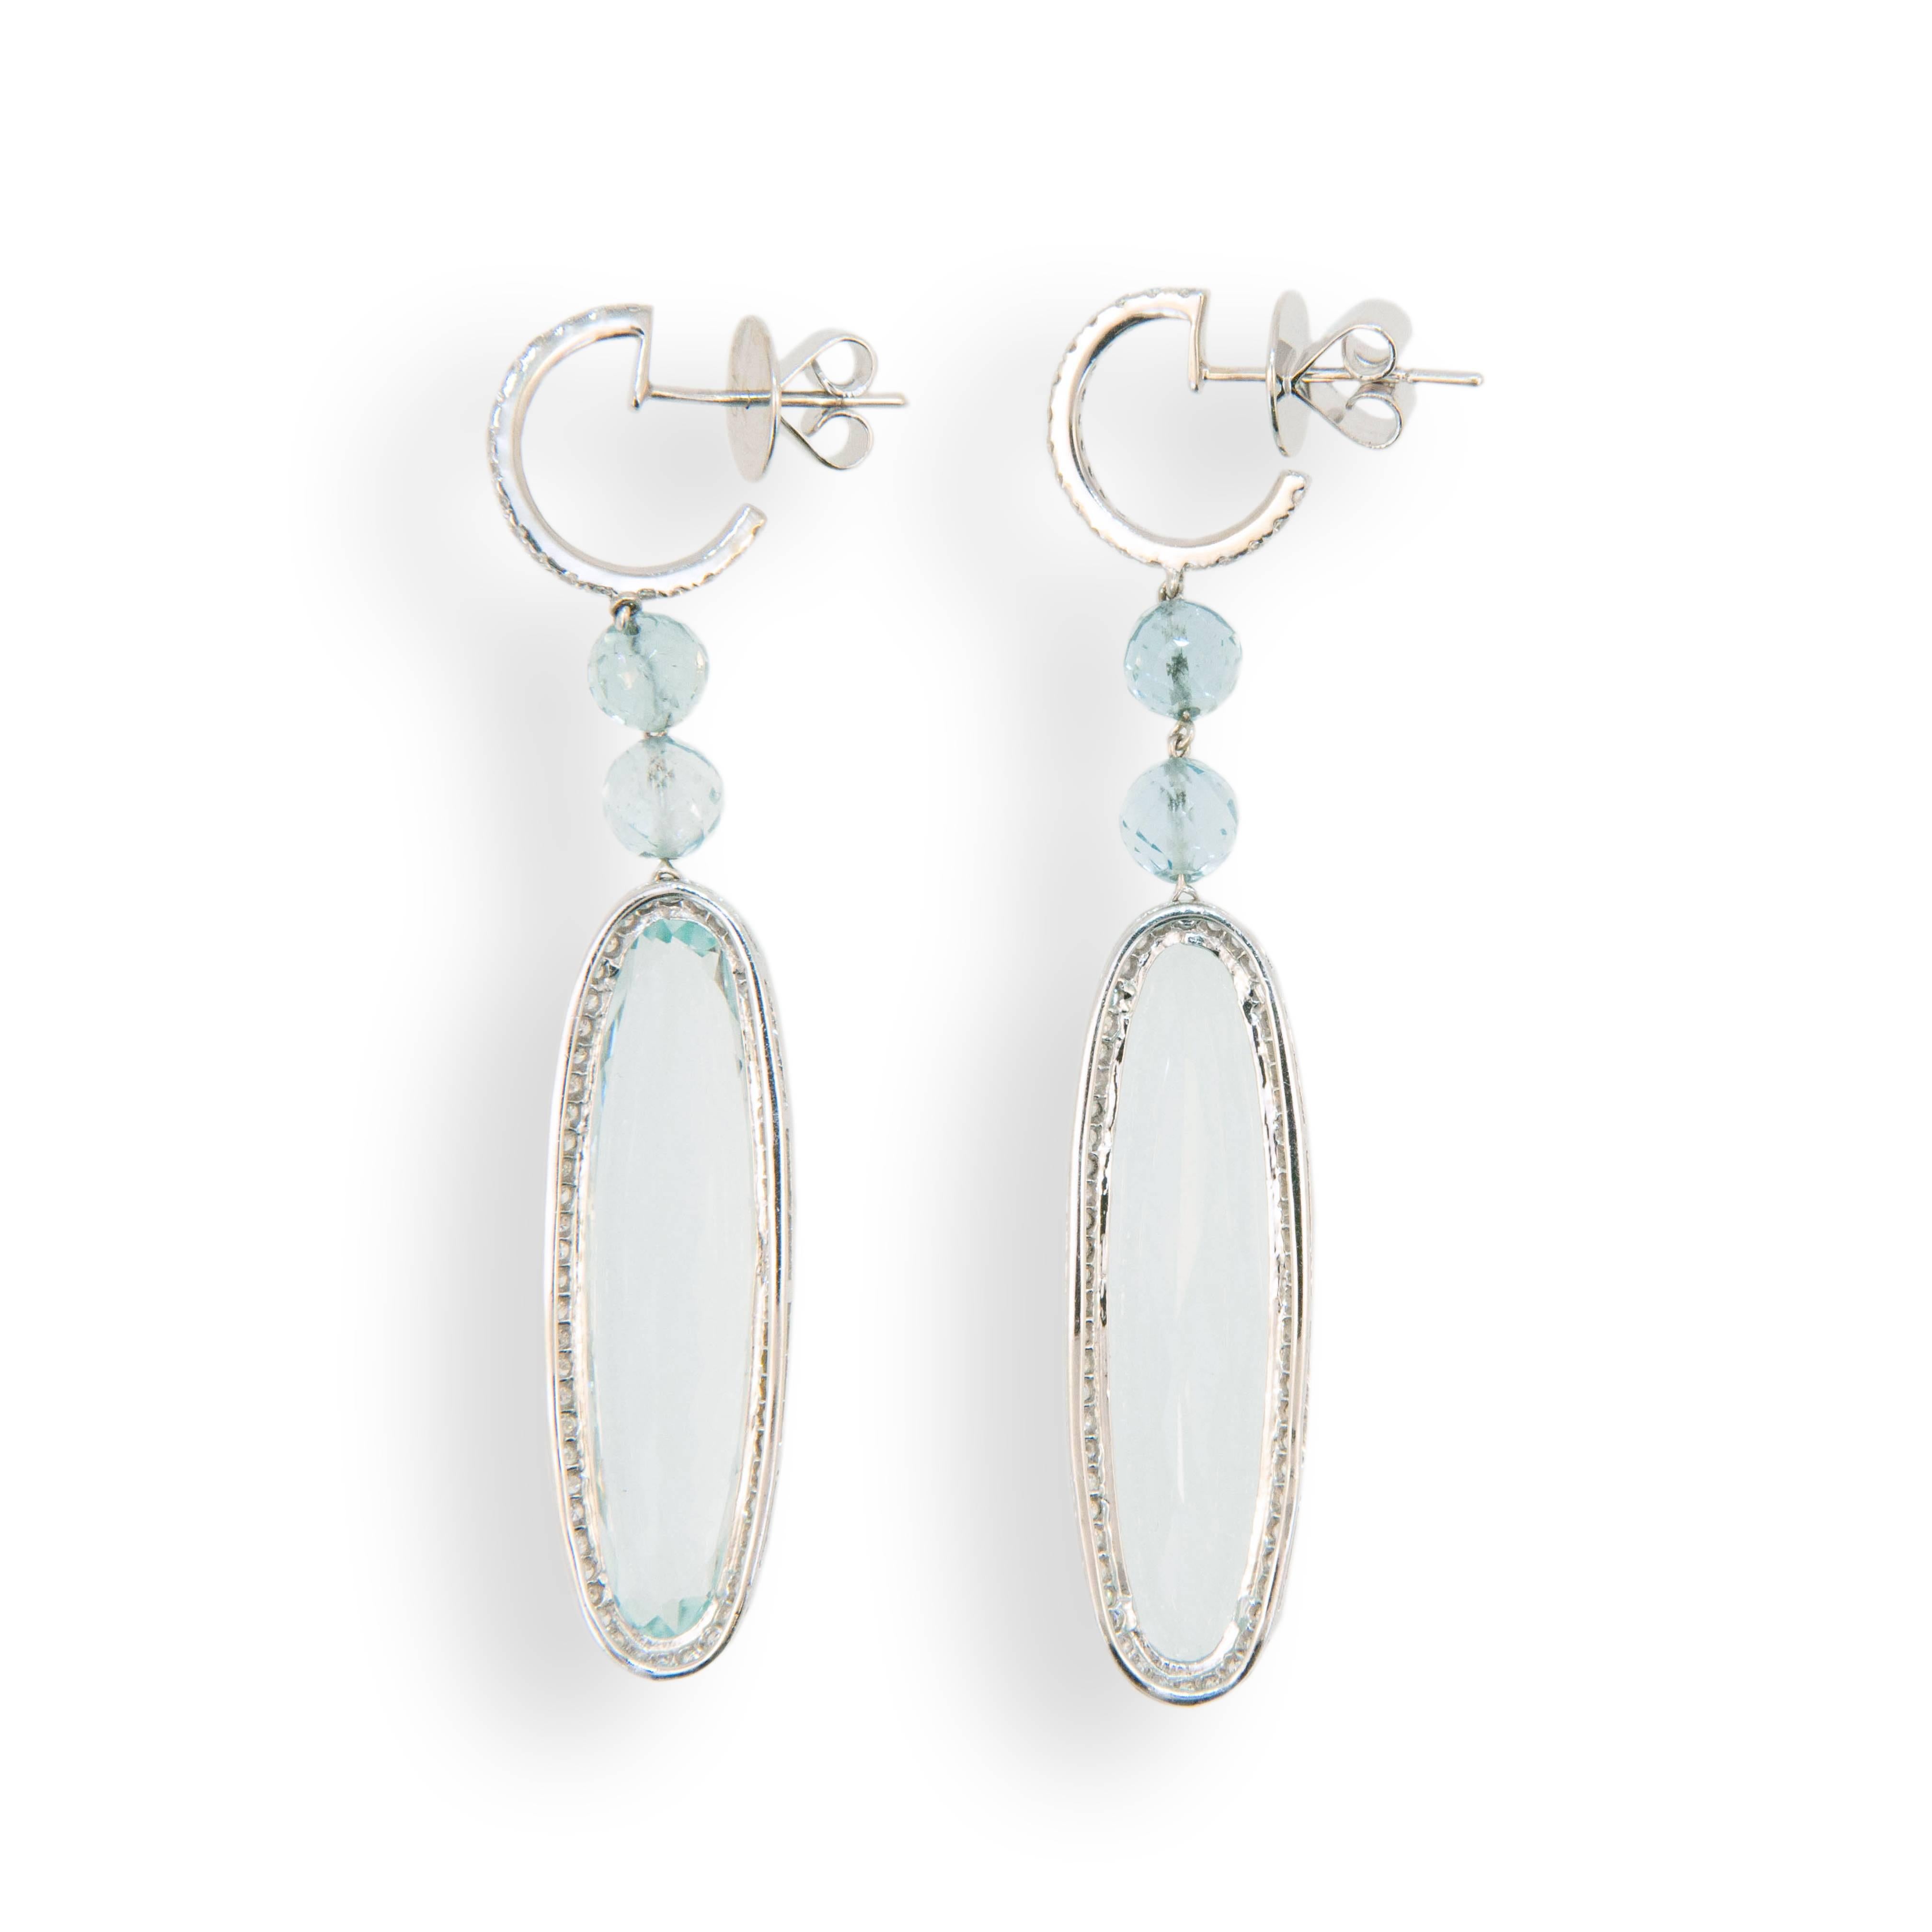 18 karat white gold drop earrings set with (2) long oval Aquamarines 34.18 carats total weight. Approximately 1 3/8 inches length, four faceted Aquamarine beads 5.36 carats total weight and 156 micro set round Diamonds 1.13 carats total weight. Top